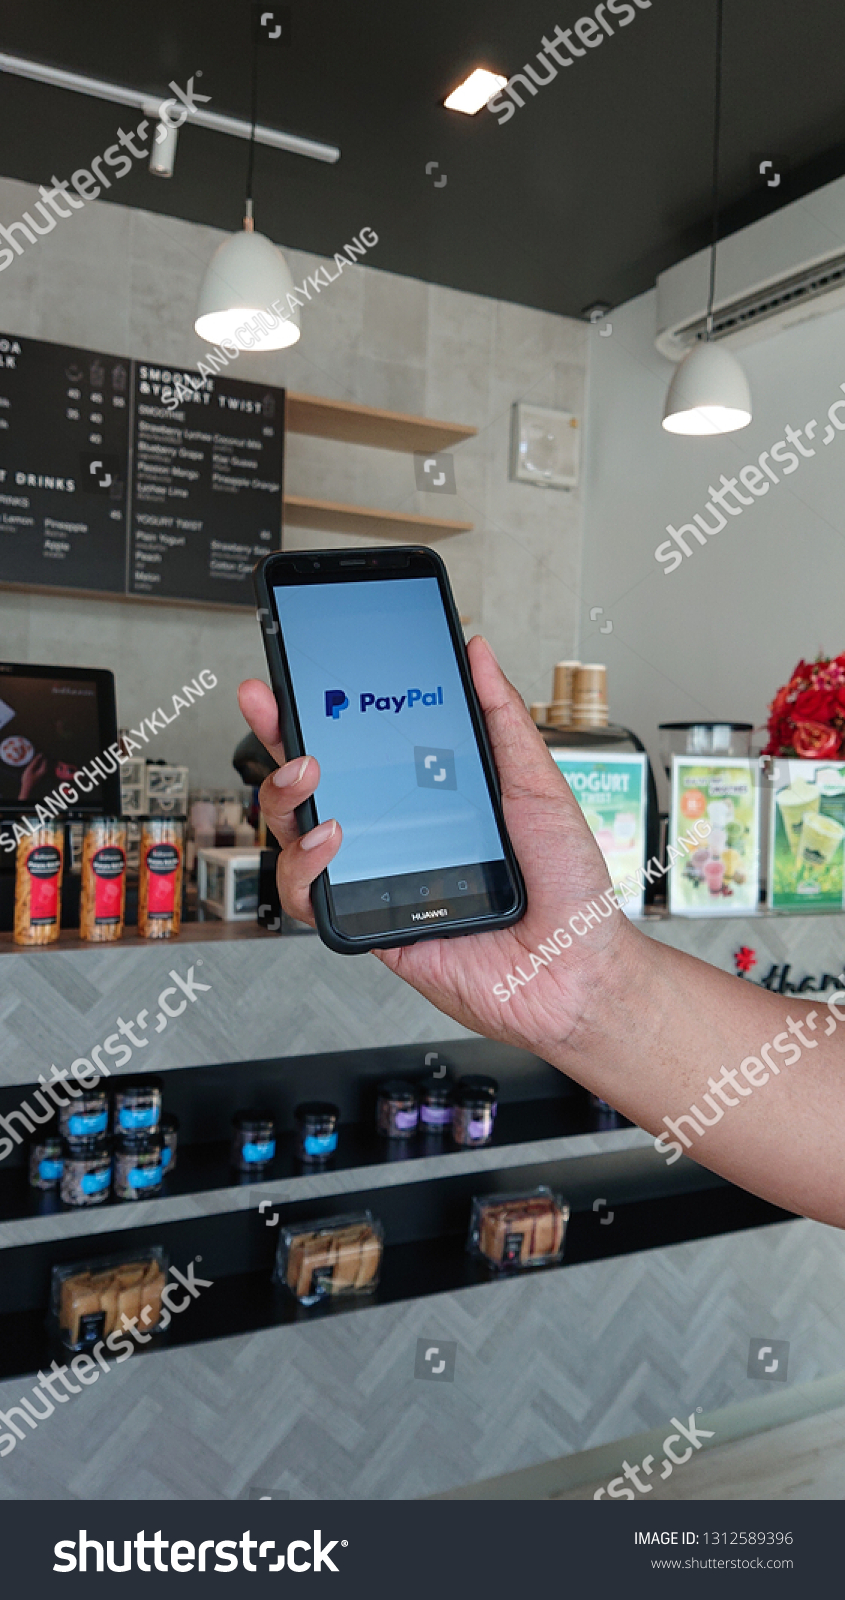 Khon kaen, Thailand - February 14 2019, HUAWEI smartphone showing Paypal application business daily information. #1312589396